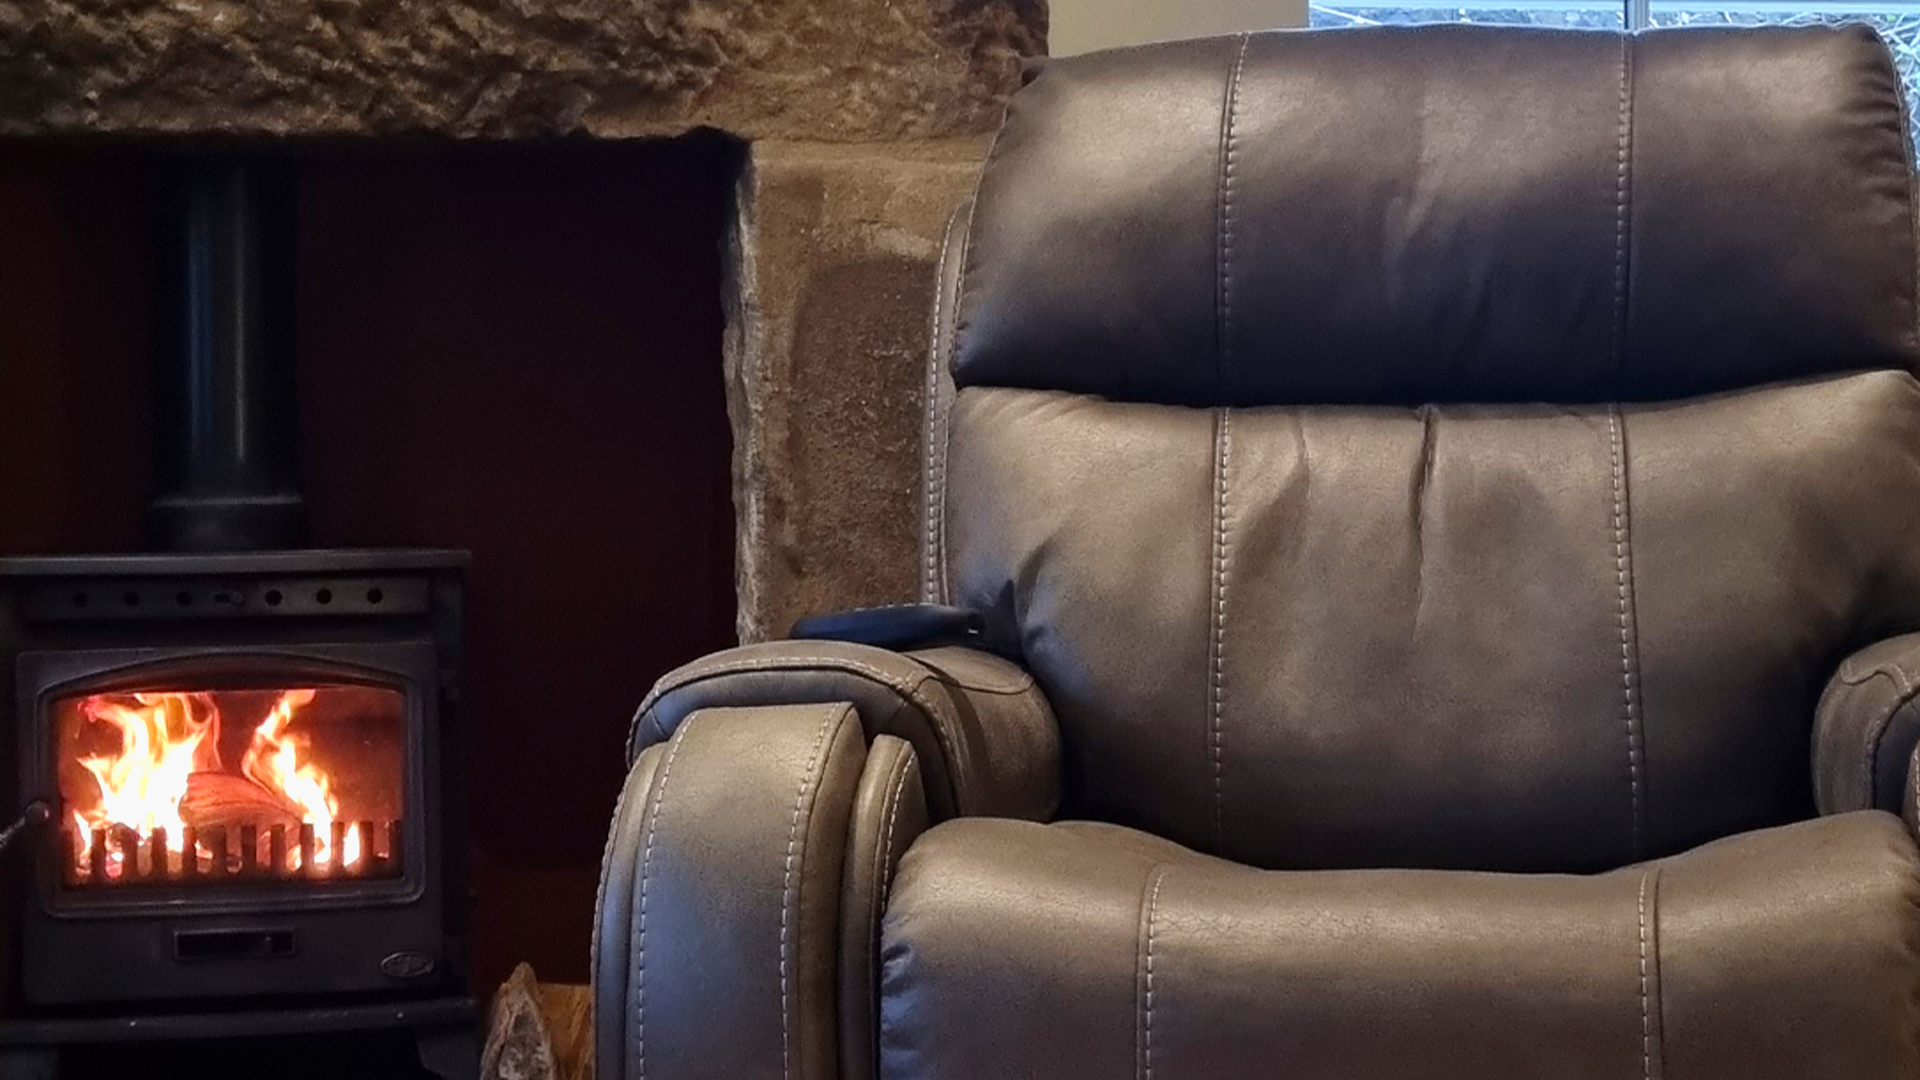 Why are riser recliners good for hip and knee pain?